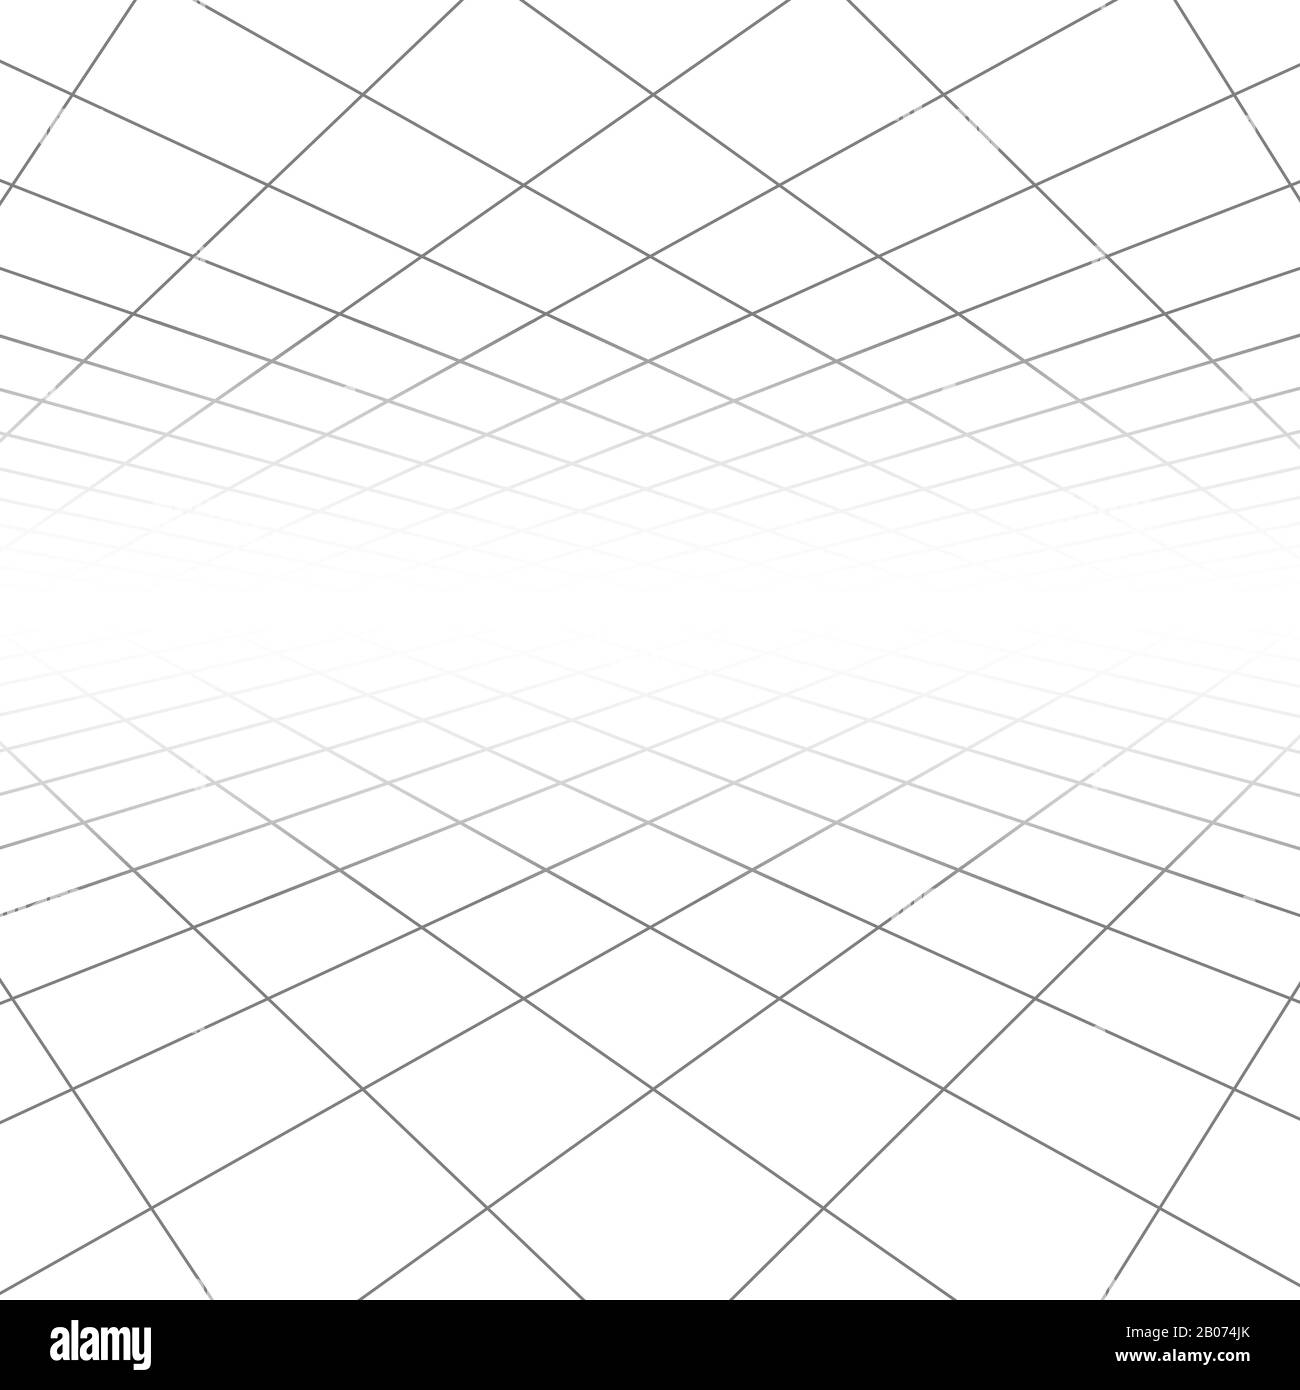 Ceiling And Floor Tile Texture 3d Lines In Perspective Vision Vector